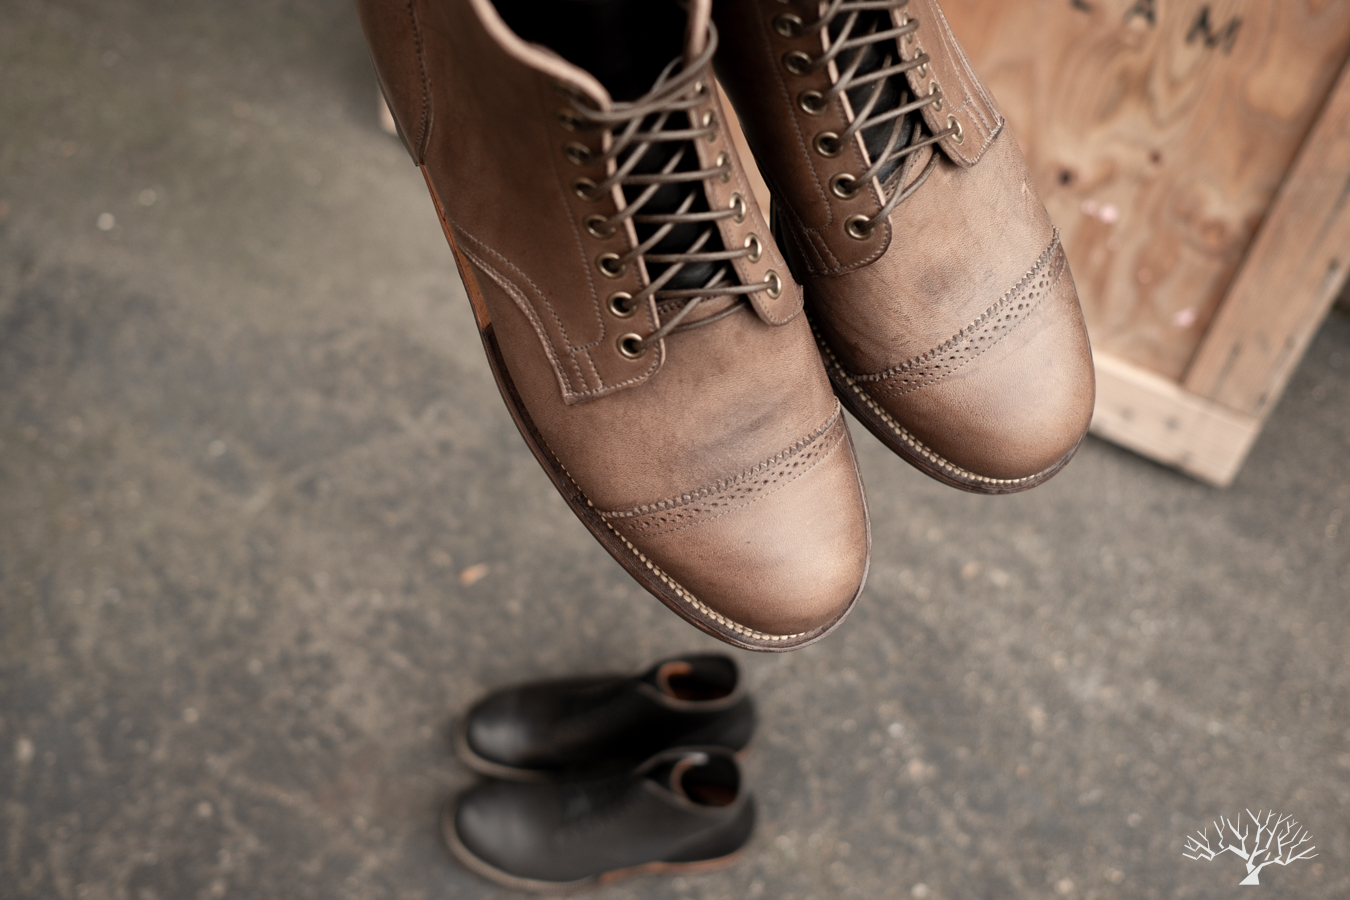 Viberg for Withered Fig Col. 1071 Waxed Horsebutt Service Boot